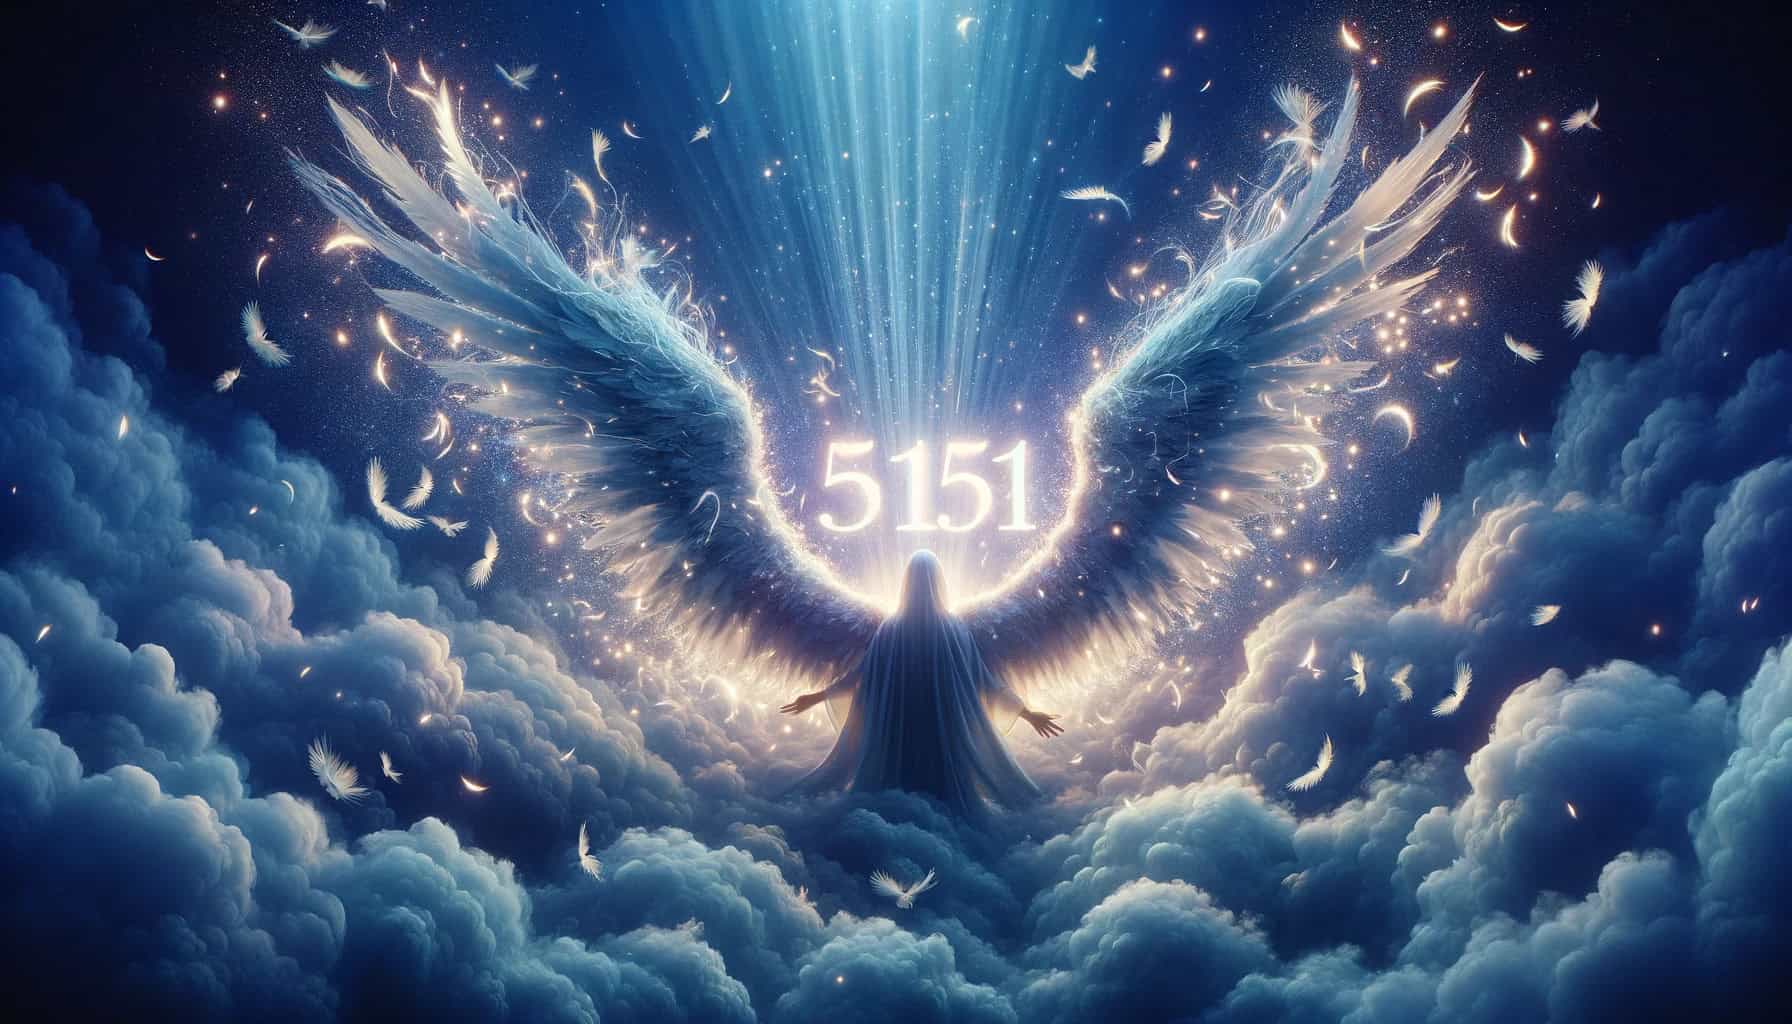 What Does the 5151 Angel Number Mean?